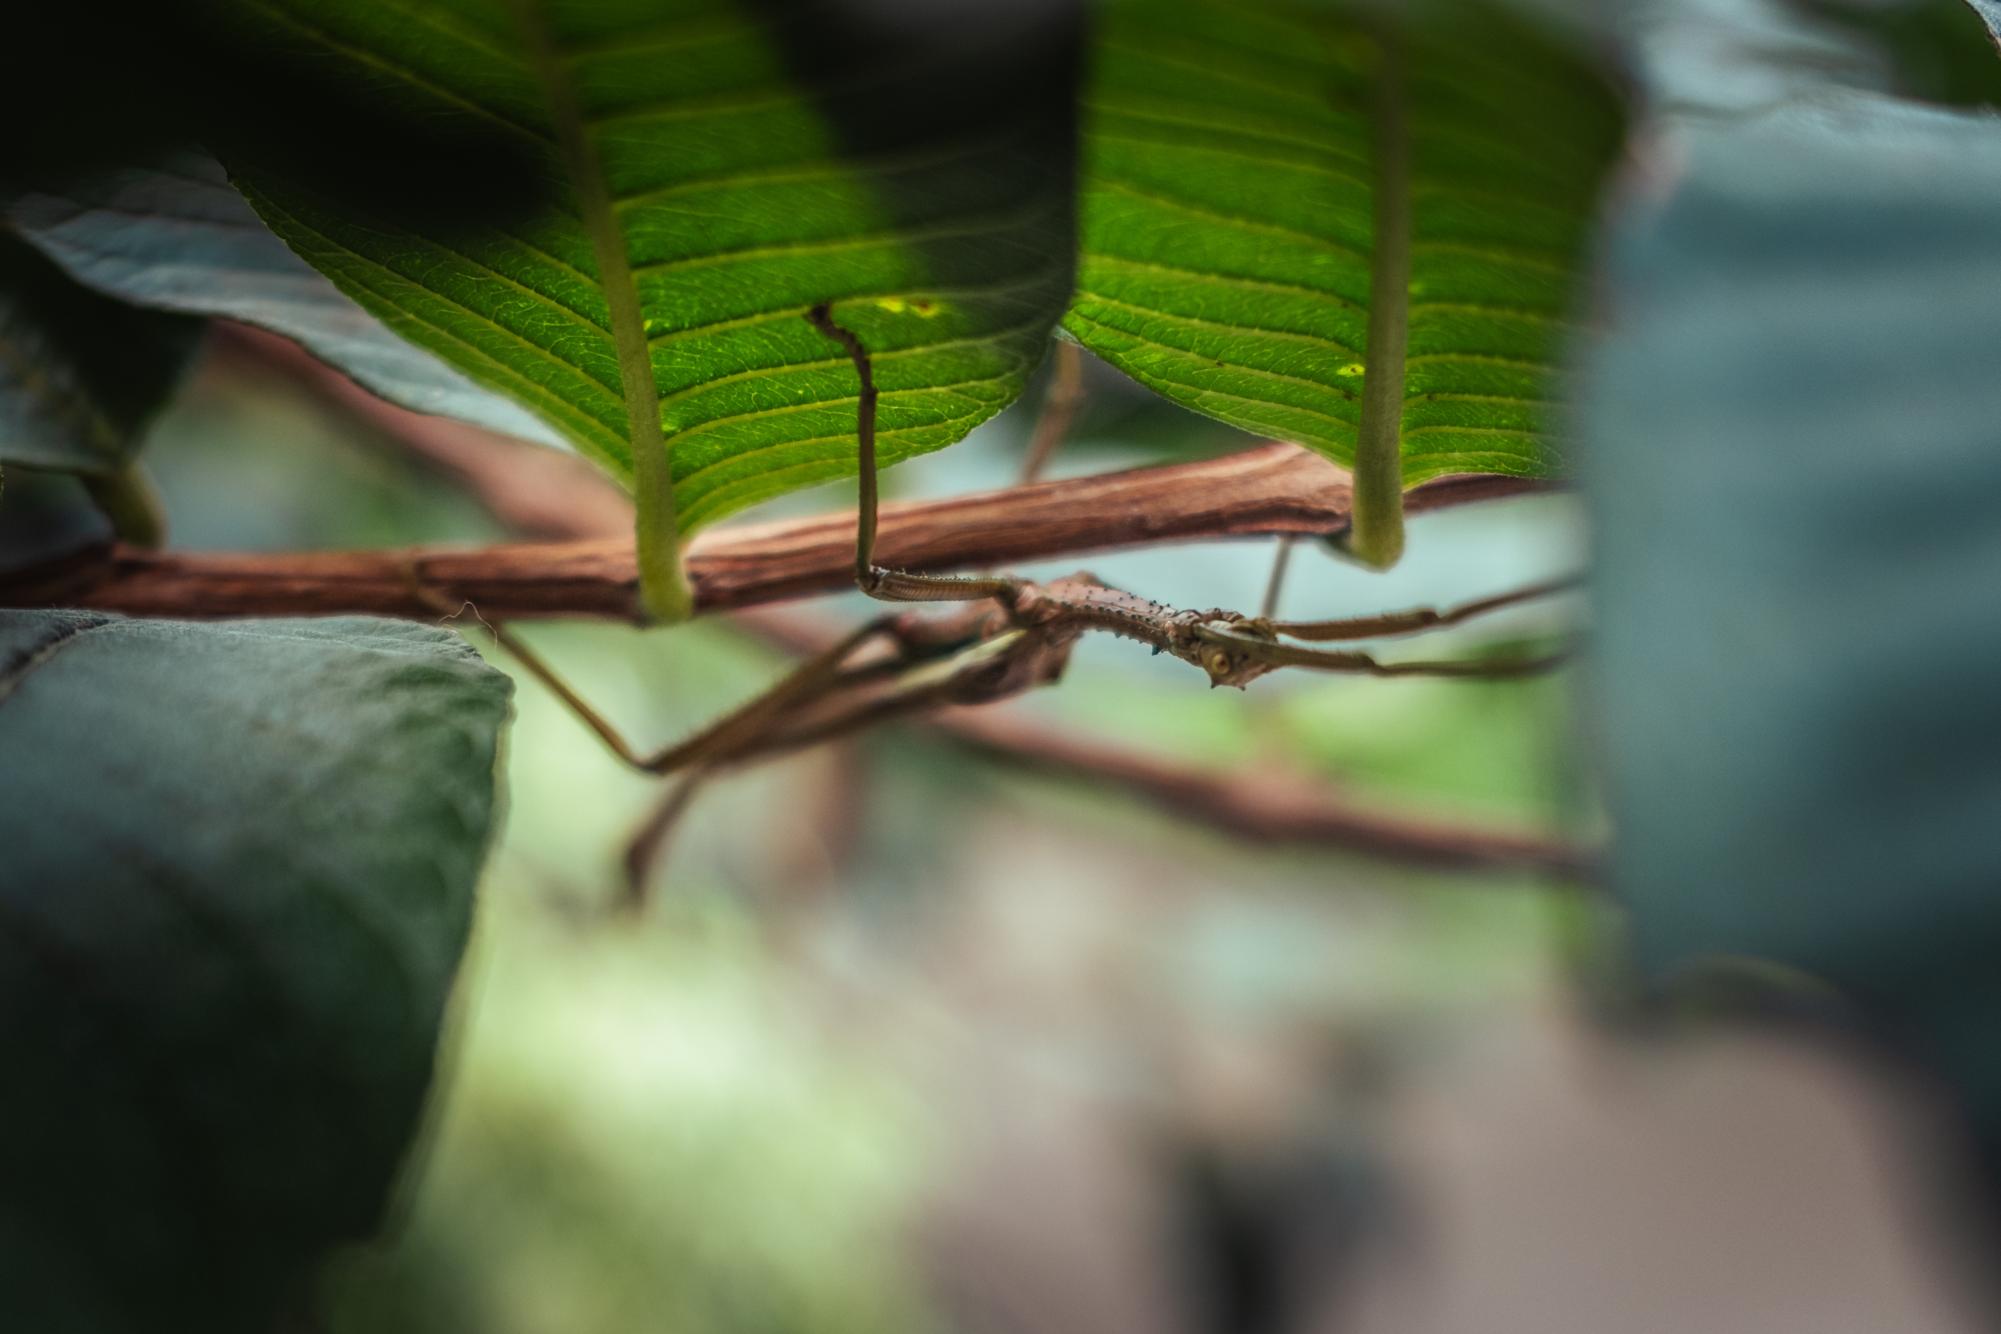 A stick-bug hanging upside down on a branch with leaves.